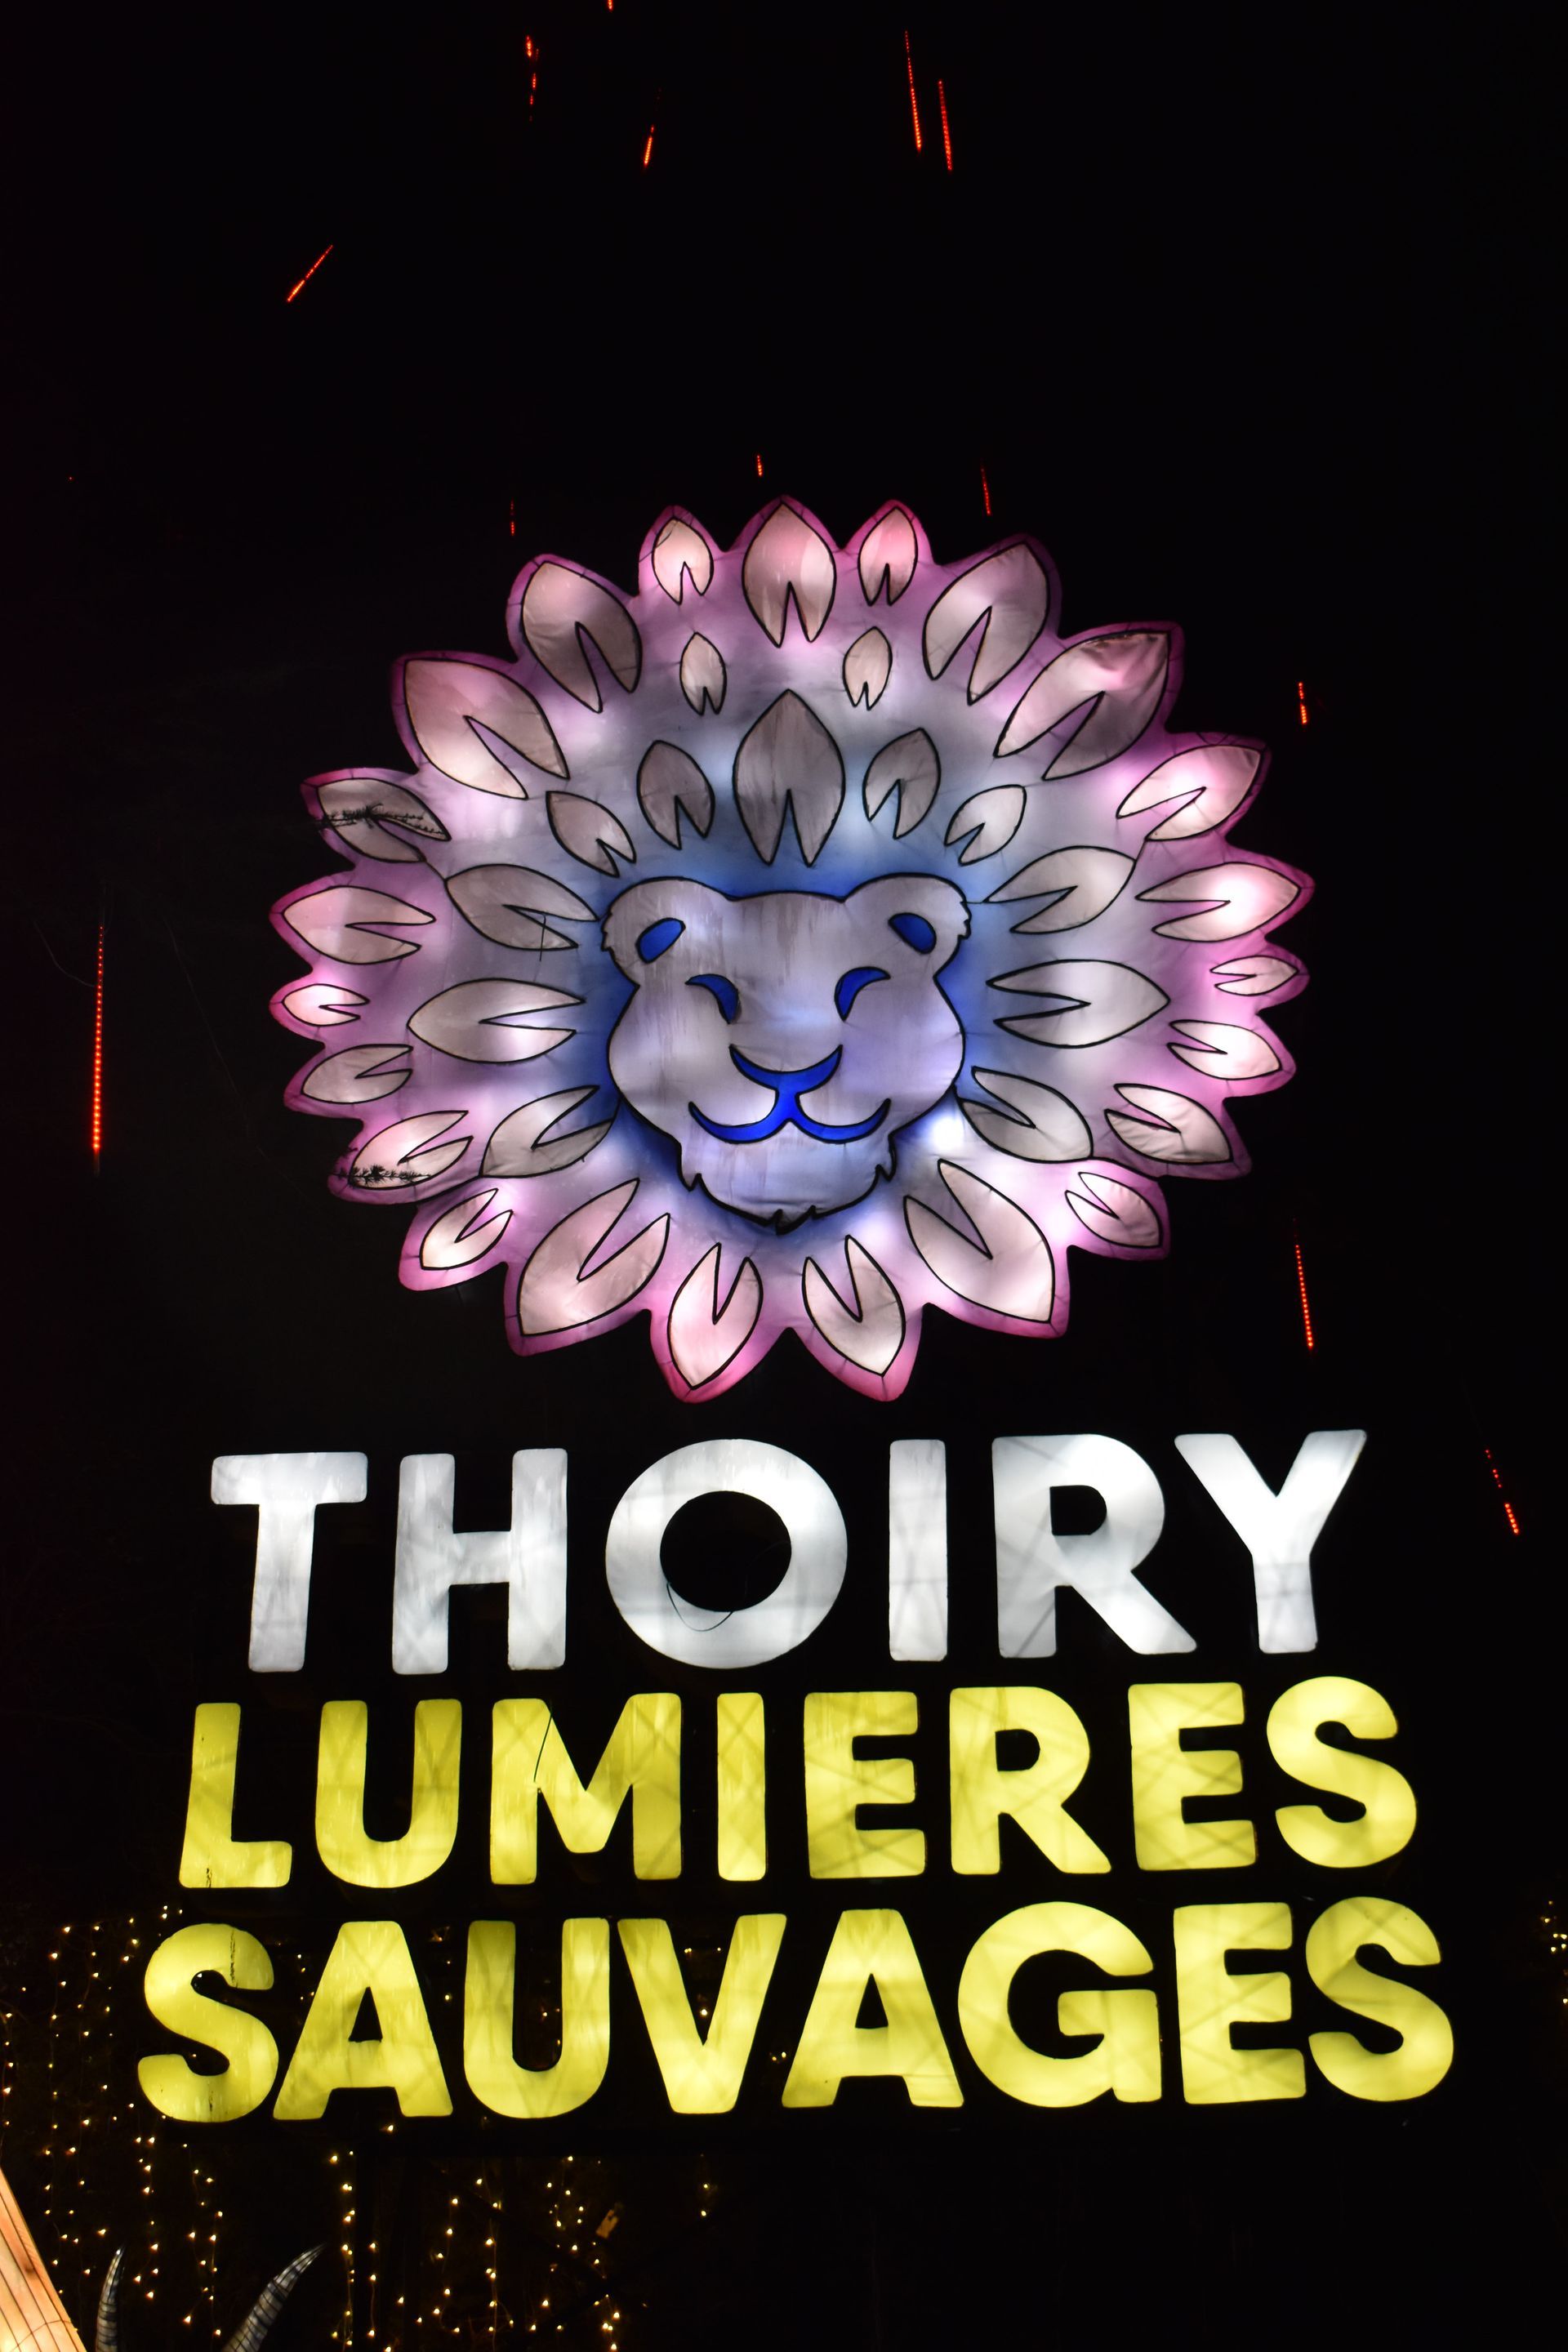 thoiry lumières sauvages, éditions 2023-2024